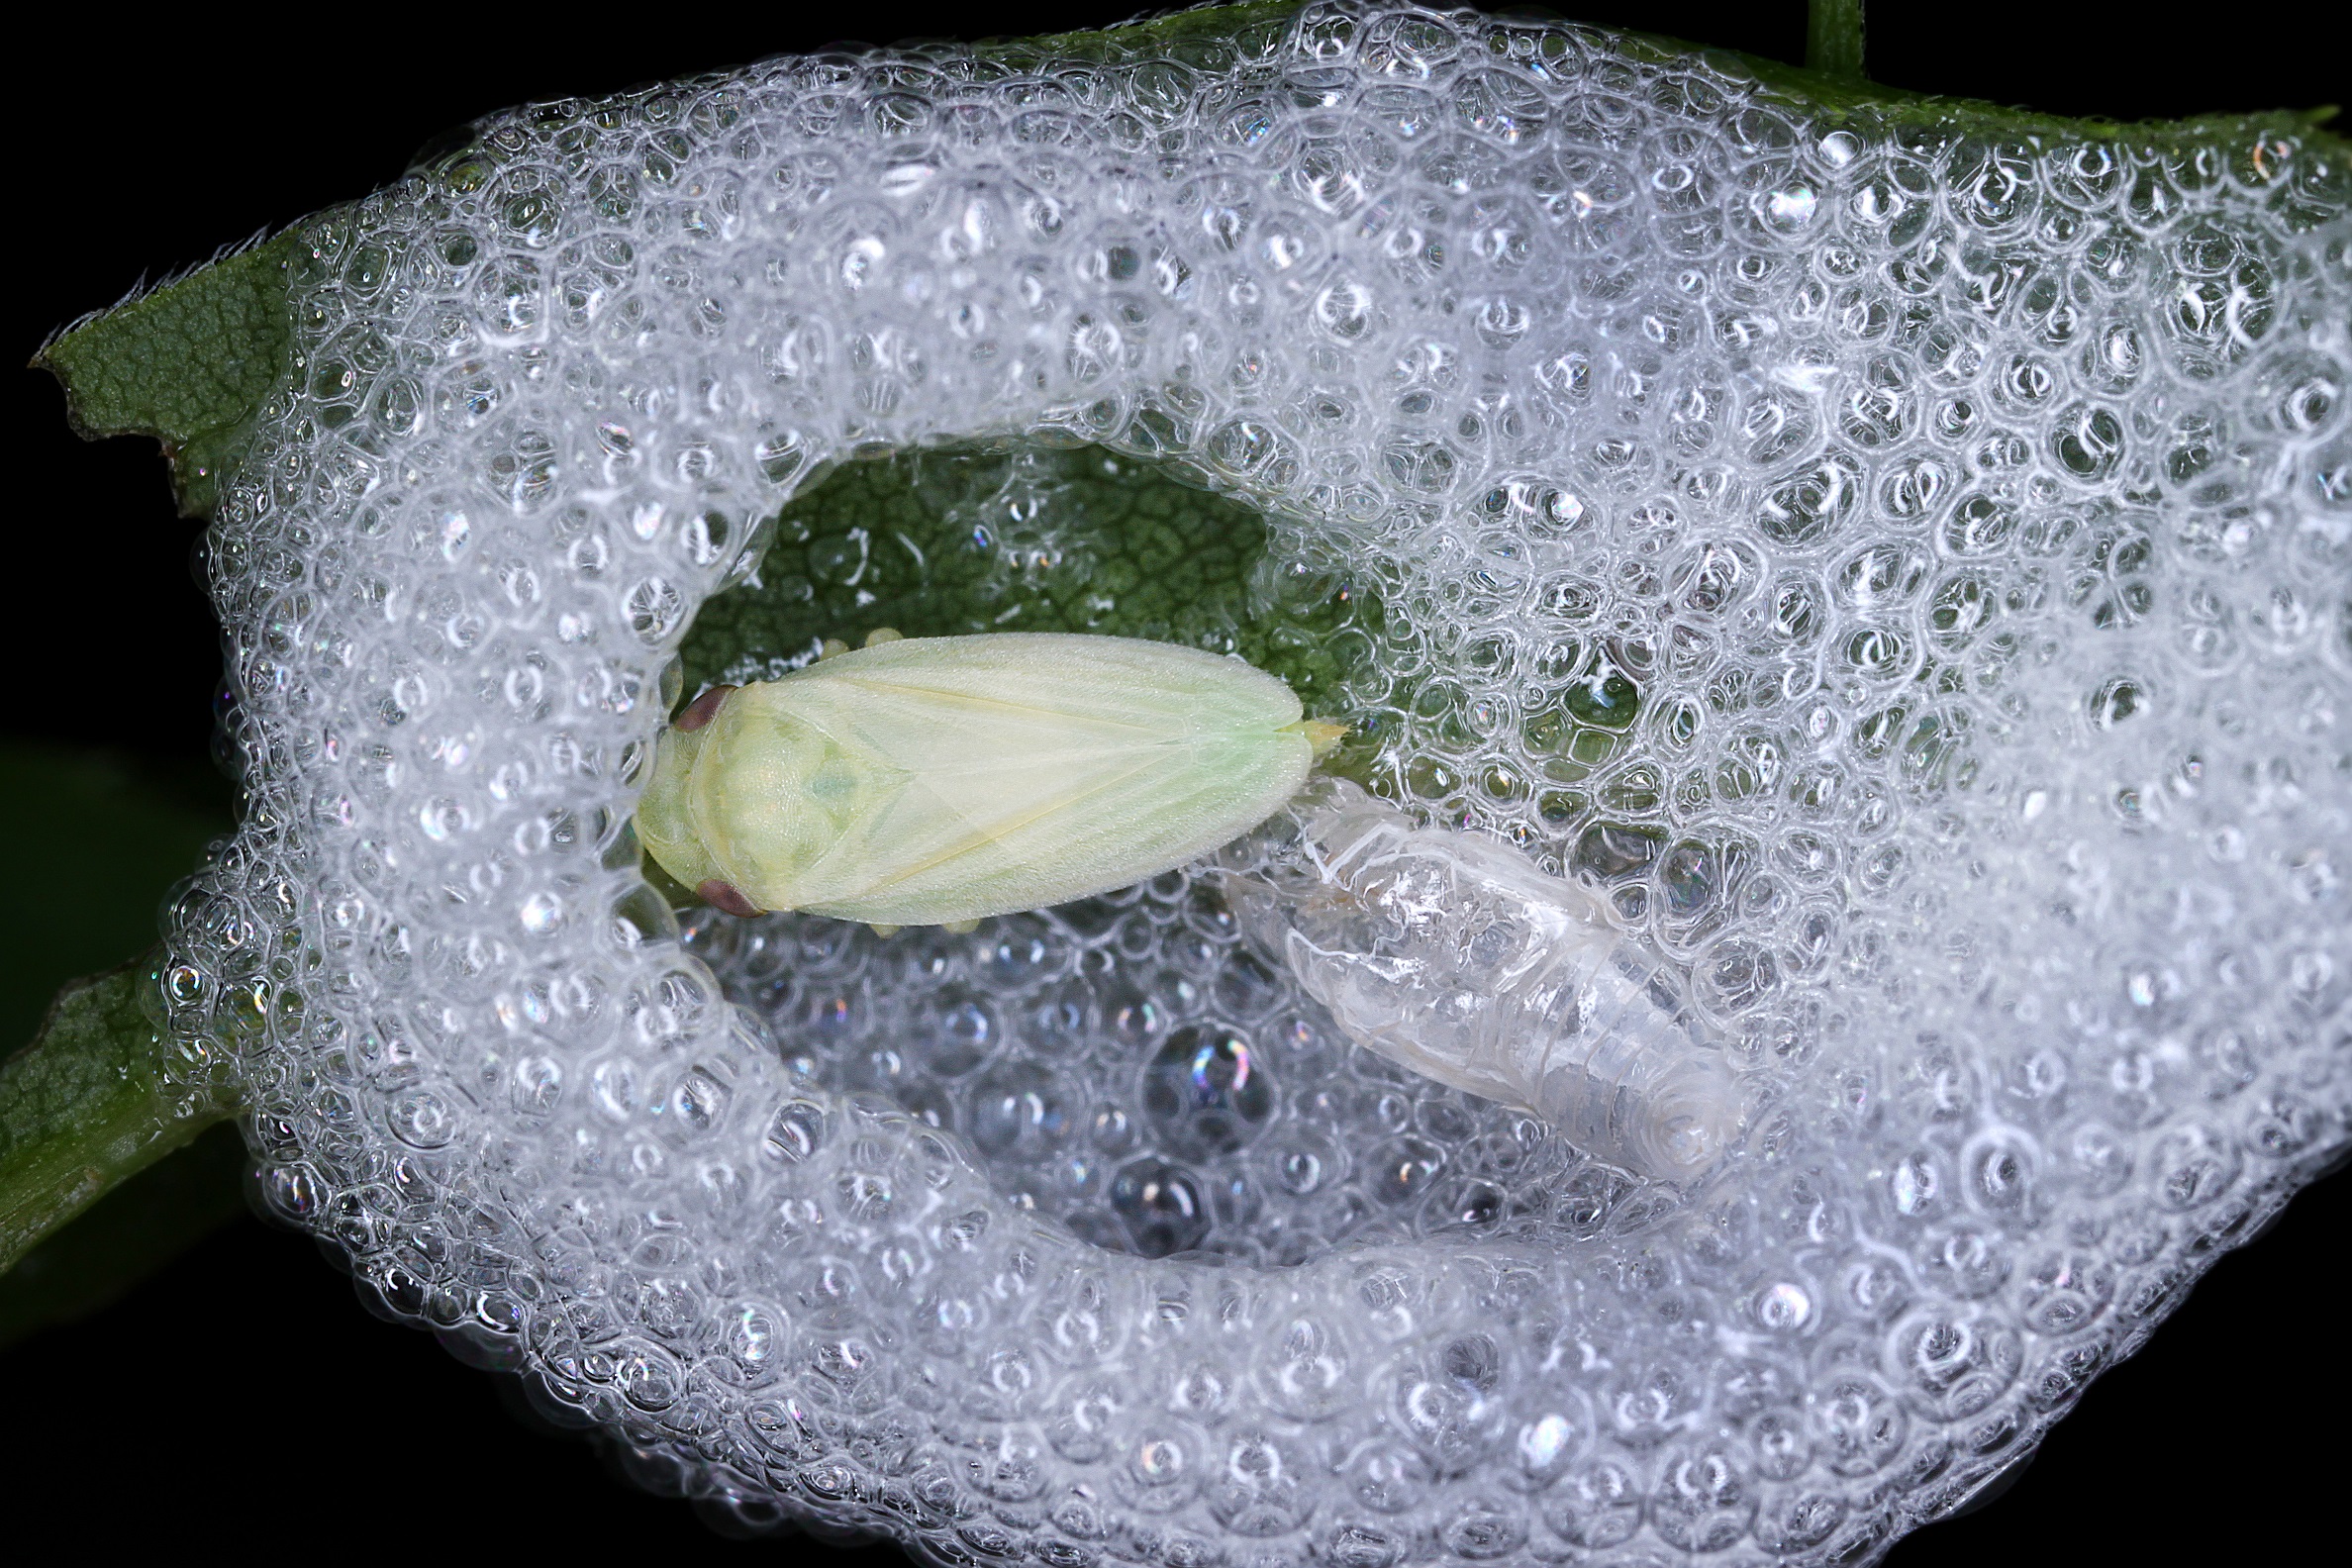 Gardeners have been asked to spot spittle on leaves in their garden. (Gernot Kunz/PA)